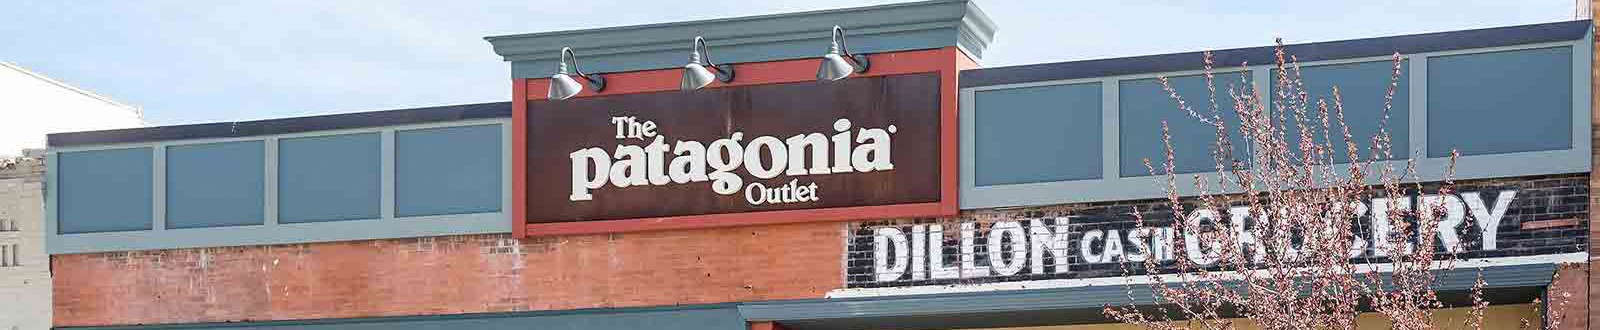 Patagonia Outlet Dillon Supported - Patagonia Action